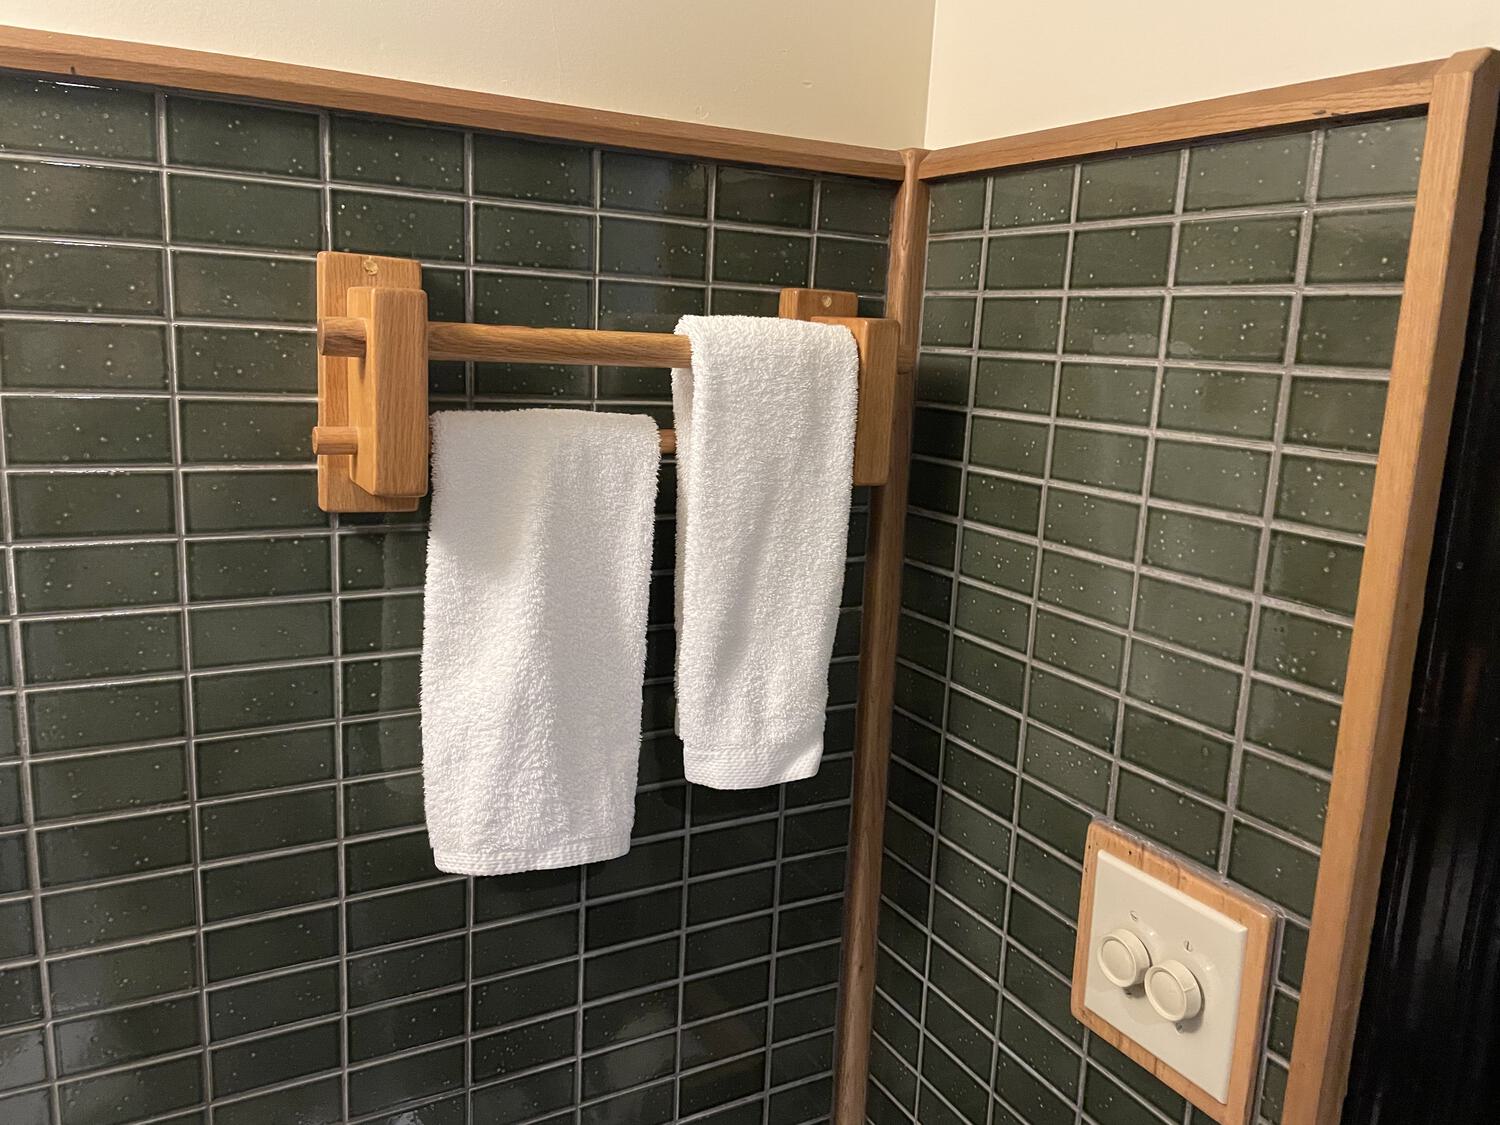 A wooden towel rack with two white hand towels on it, mounted to a wall half-clad in green subway tile. The wall is trimmed with wood matching the towel rack